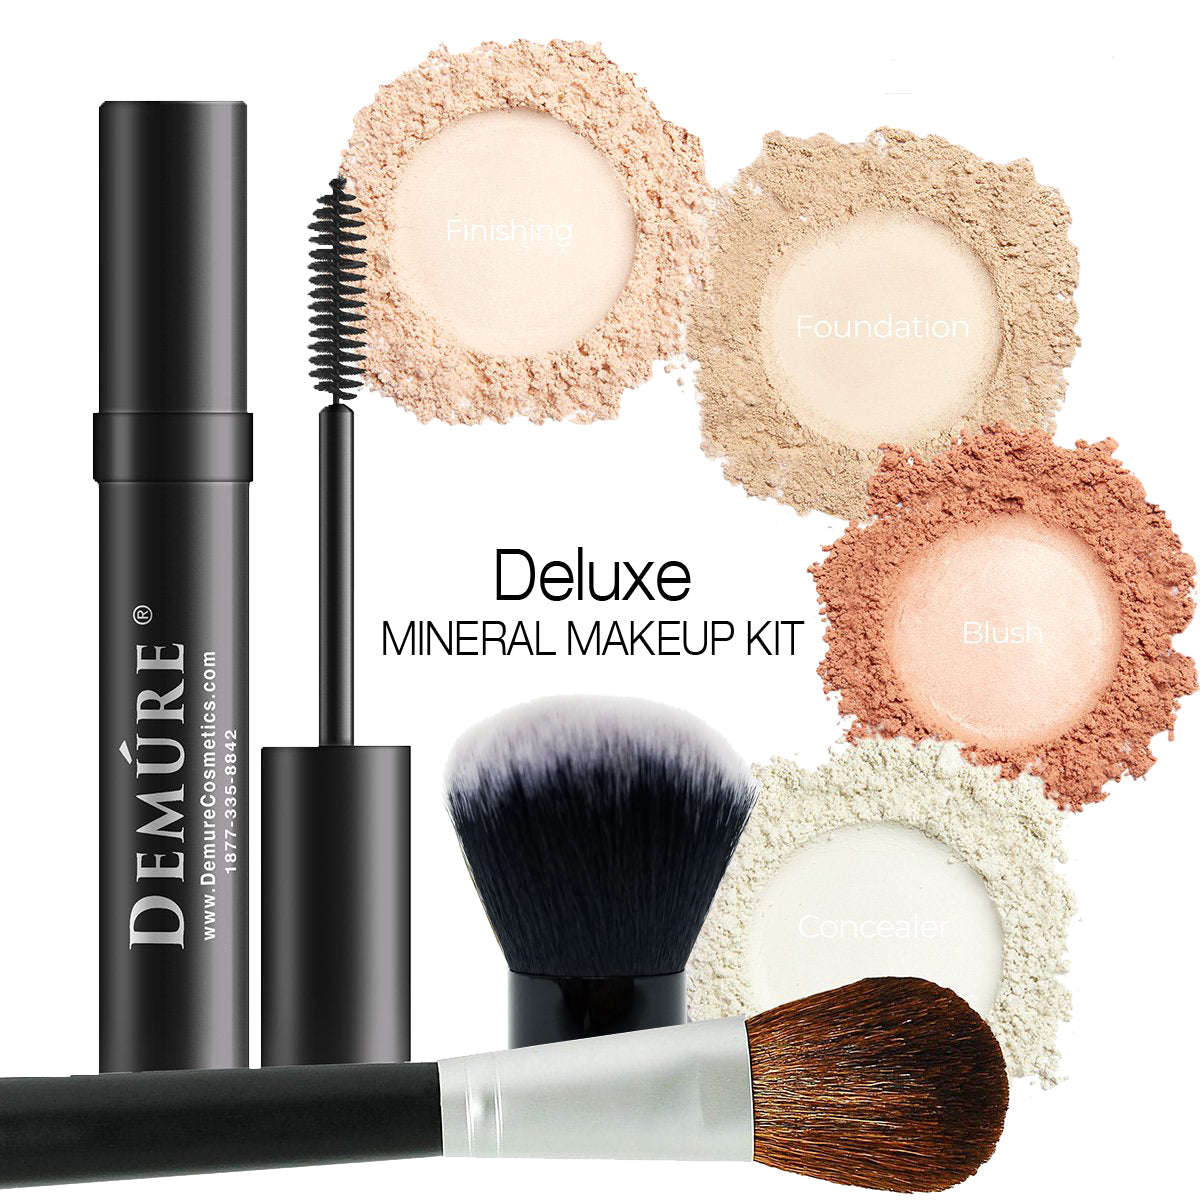 Deluxe Mineral Makeup Kit Deluvia